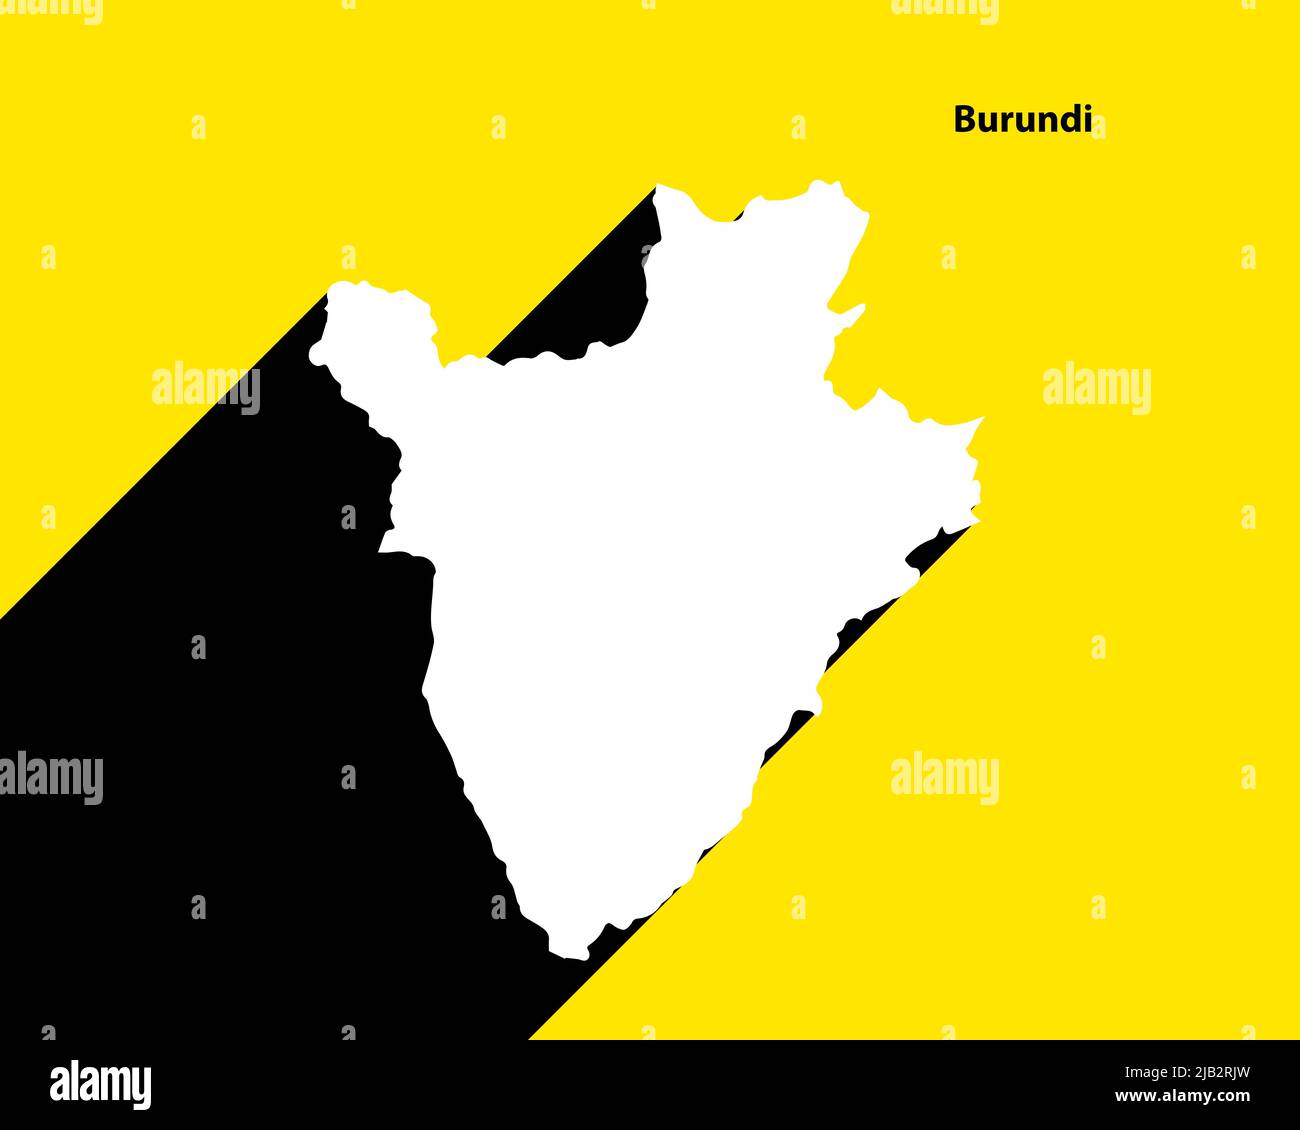 Burundi Map on retro poster with long shadow. Vintage sign easy to edit, manipulate, resize or colorise. Stock Vector